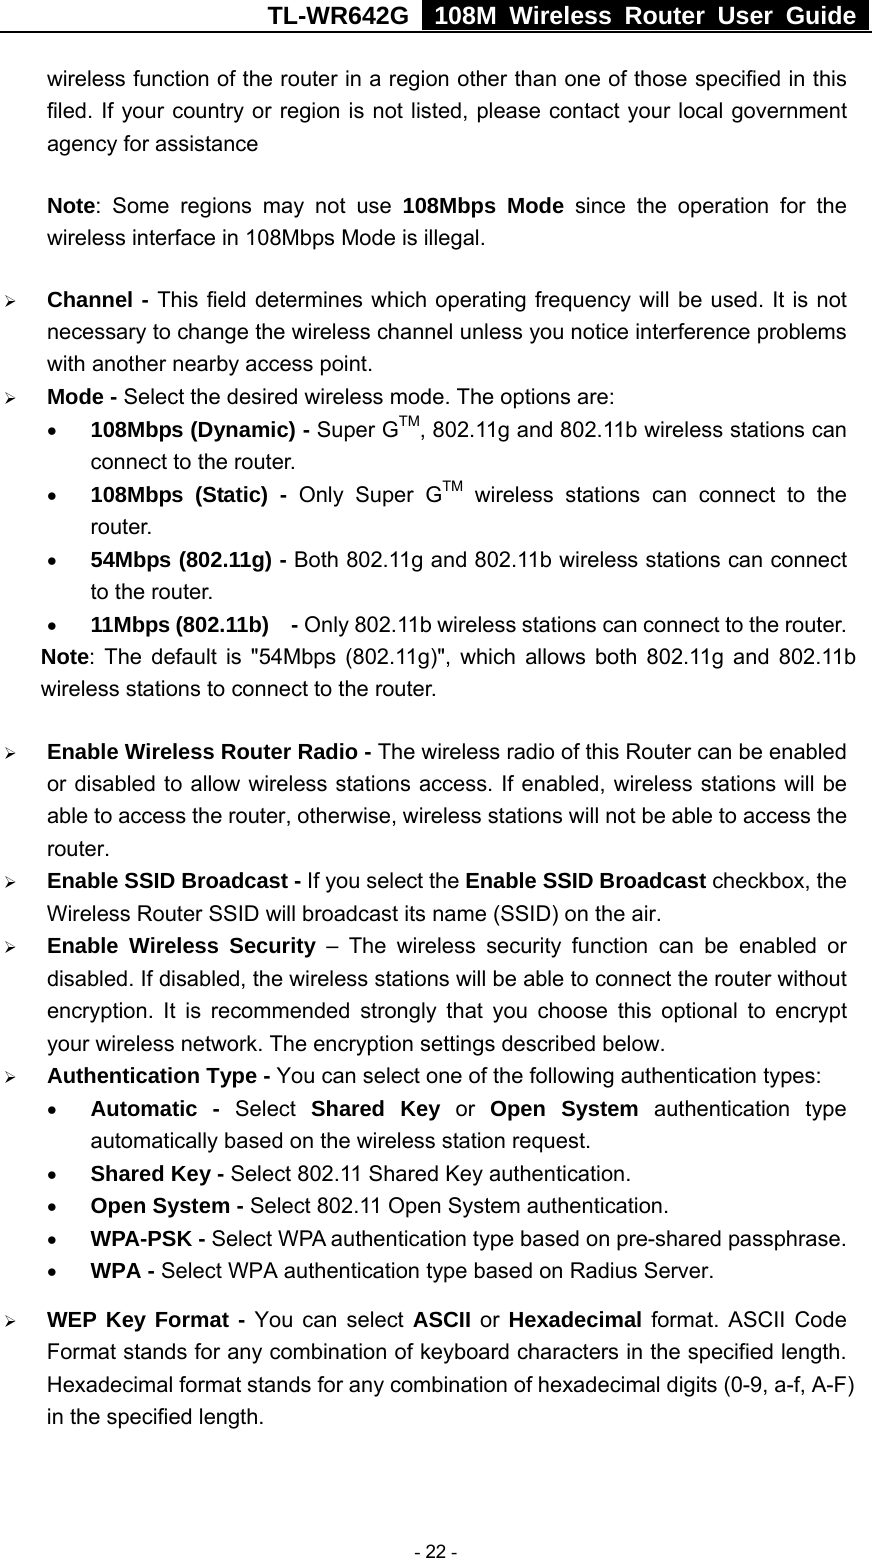 TL-WR642G   108M Wireless Router User Guide   - 22 - wireless function of the router in a region other than one of those specified in this filed. If your country or region is not listed, please contact your local government agency for assistance Note: Some regions may not use 108Mbps Mode since the operation for the wireless interface in 108Mbps Mode is illegal. ¾ Channel - This field determines which operating frequency will be used. It is not necessary to change the wireless channel unless you notice interference problems with another nearby access point. ¾ Mode - Select the desired wireless mode. The options are:   • 108Mbps (Dynamic) - Super GTM, 802.11g and 802.11b wireless stations can connect to the router. • 108Mbps (Static) - Only Super GTM wireless stations can connect to the router. • 54Mbps (802.11g) - Both 802.11g and 802.11b wireless stations can connect to the router. • 11Mbps (802.11b)  - Only 802.11b wireless stations can connect to the router. Note: The default is &quot;54Mbps (802.11g)&quot;, which allows both 802.11g and 802.11b wireless stations to connect to the router. ¾ Enable Wireless Router Radio - The wireless radio of this Router can be enabled or disabled to allow wireless stations access. If enabled, wireless stations will be able to access the router, otherwise, wireless stations will not be able to access the router. ¾ Enable SSID Broadcast - If you select the Enable SSID Broadcast checkbox, the Wireless Router SSID will broadcast its name (SSID) on the air. ¾ Enable Wireless Security – The wireless security function can be enabled or disabled. If disabled, the wireless stations will be able to connect the router without encryption. It is recommended strongly that you choose this optional to encrypt your wireless network. The encryption settings described below. ¾ Authentication Type - You can select one of the following authentication types: • Automatic - Select Shared Key or Open System authentication type automatically based on the wireless station request. • Shared Key - Select 802.11 Shared Key authentication. • Open System - Select 802.11 Open System authentication.   • WPA-PSK - Select WPA authentication type based on pre-shared passphrase.   • WPA - Select WPA authentication type based on Radius Server. ¾ WEP Key Format - You can select ASCII or  Hexadecimal format. ASCII Code Format stands for any combination of keyboard characters in the specified length. Hexadecimal format stands for any combination of hexadecimal digits (0-9, a-f, A-F) in the specified length. 